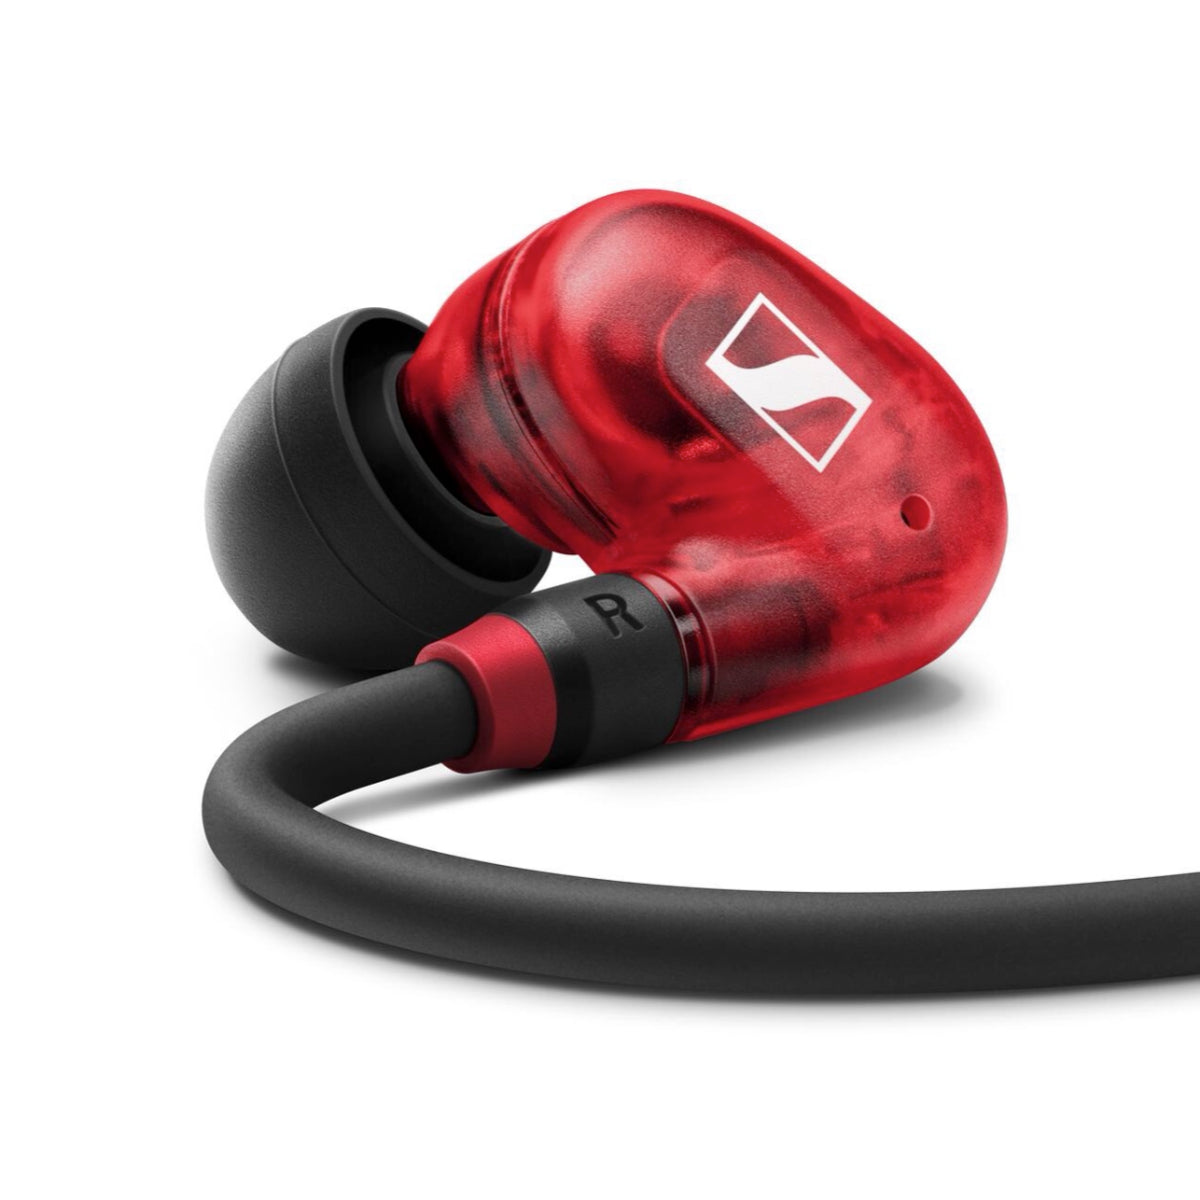 Sennheiser IE 100 PRO Red In-ear Headset, 1.3m Cable, Soft Pouch, Ear Adapters (S/M/L)